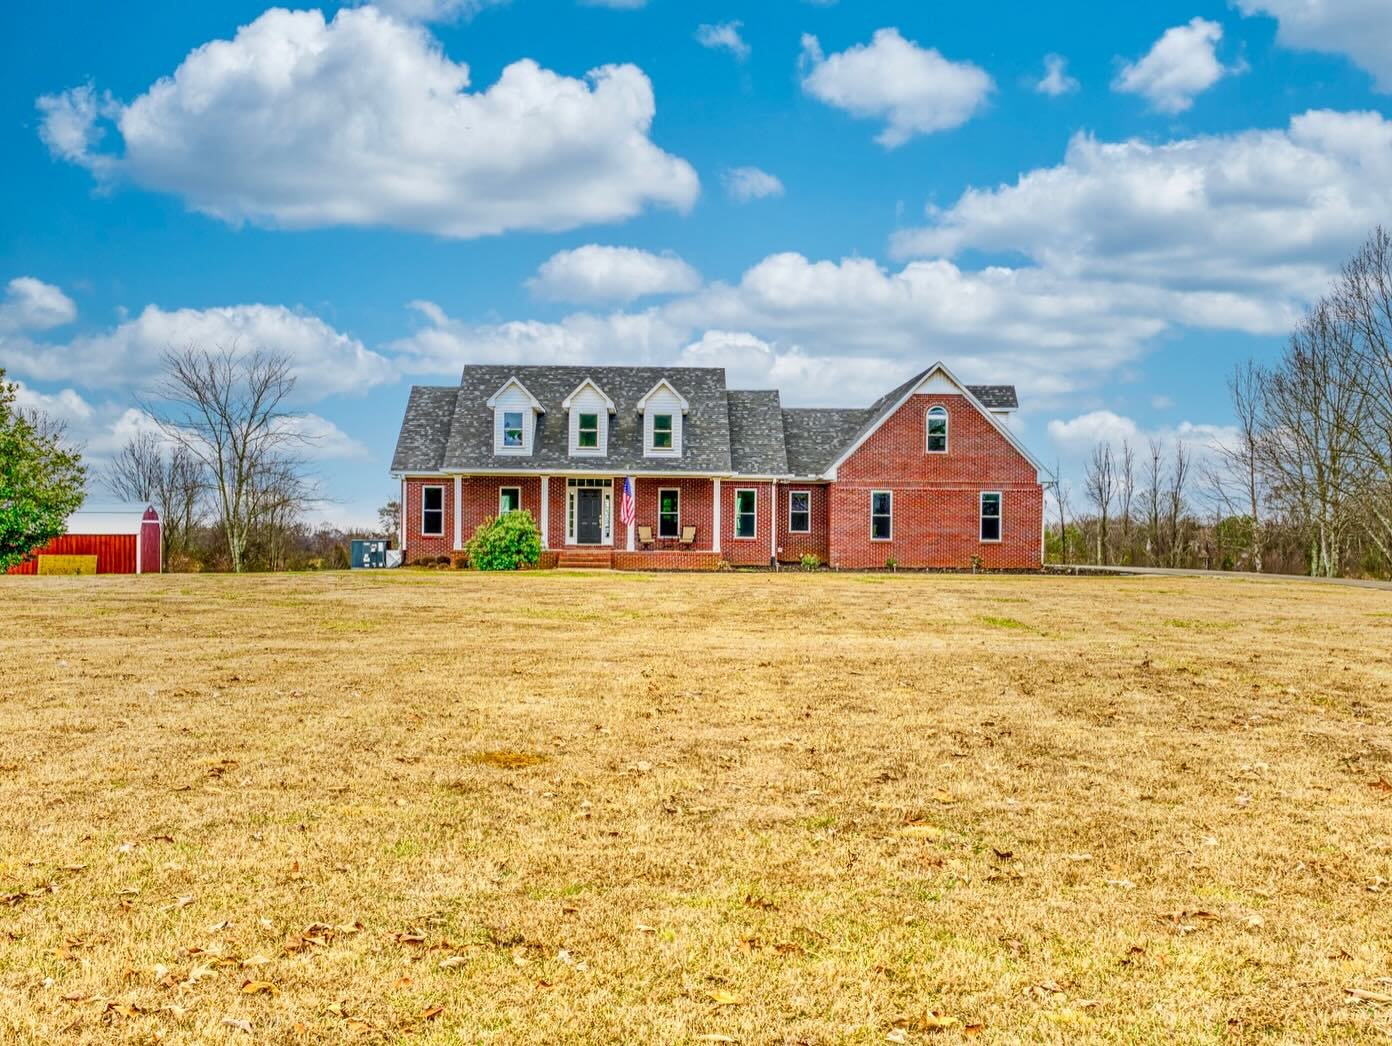 This stunning property checks all the boxes for any family&hellip;

✅ 4 bedrooms
✅ 4 baths
✅ 3,754 square feet
✅ Sits on 8 beautiful acres within 15 minutes of all the amenities you could need in Florence!
✅ Two separate kitchen and living areas on t